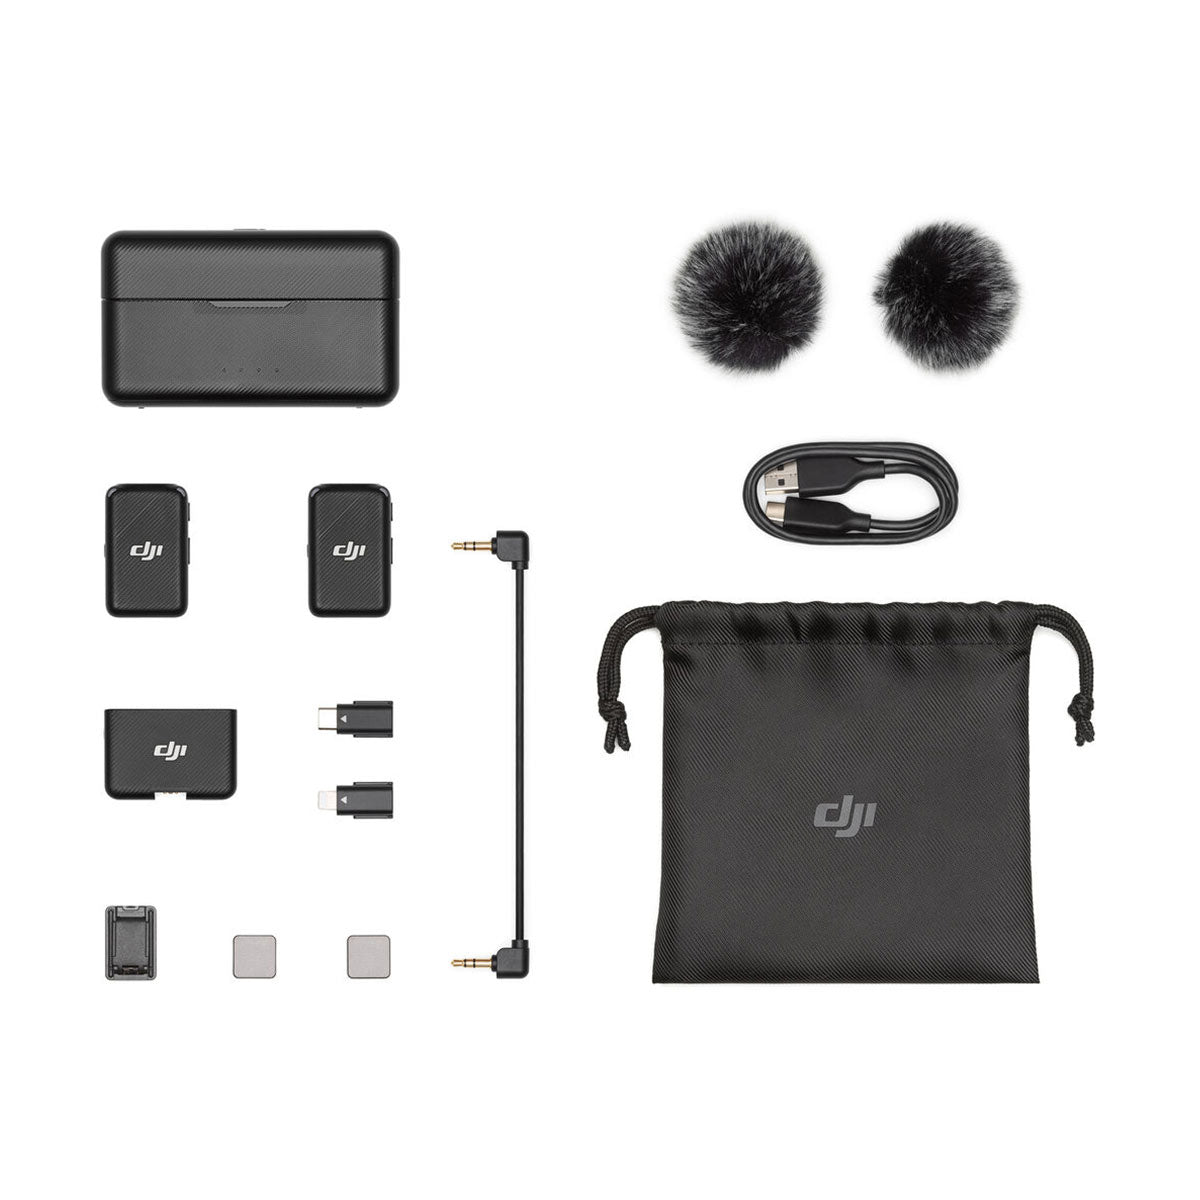 DJI 2-Microphone Compact Wireless Mic System for Camera & Smartphone (2.4 GHz)